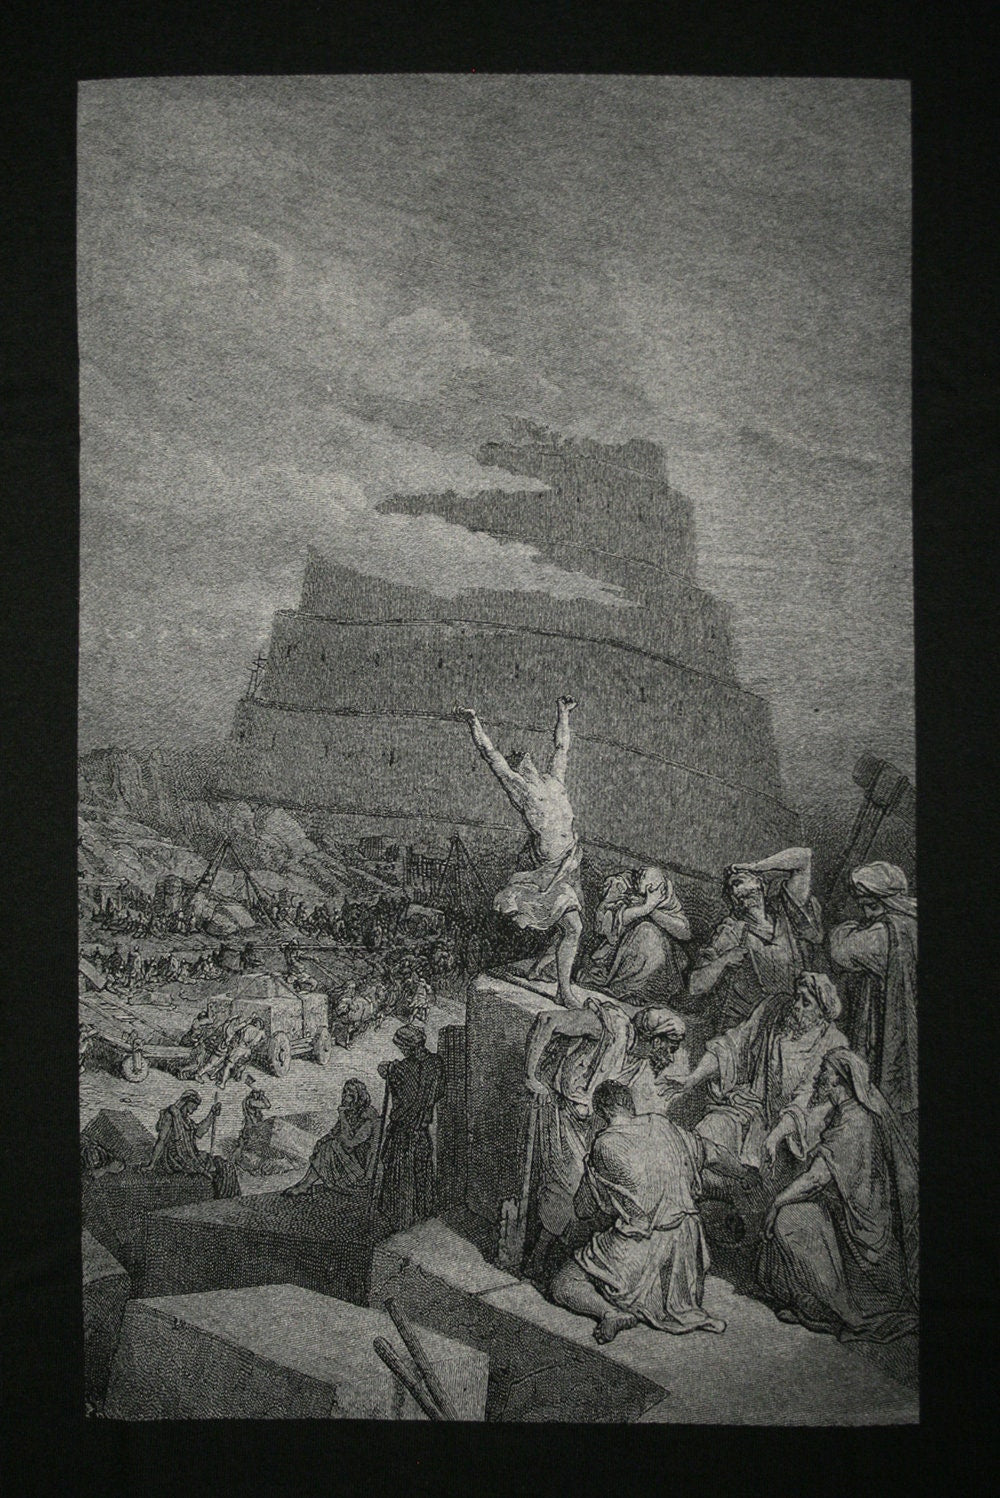 Tower of Babel, Gustave Dore - T-shirt female fitted